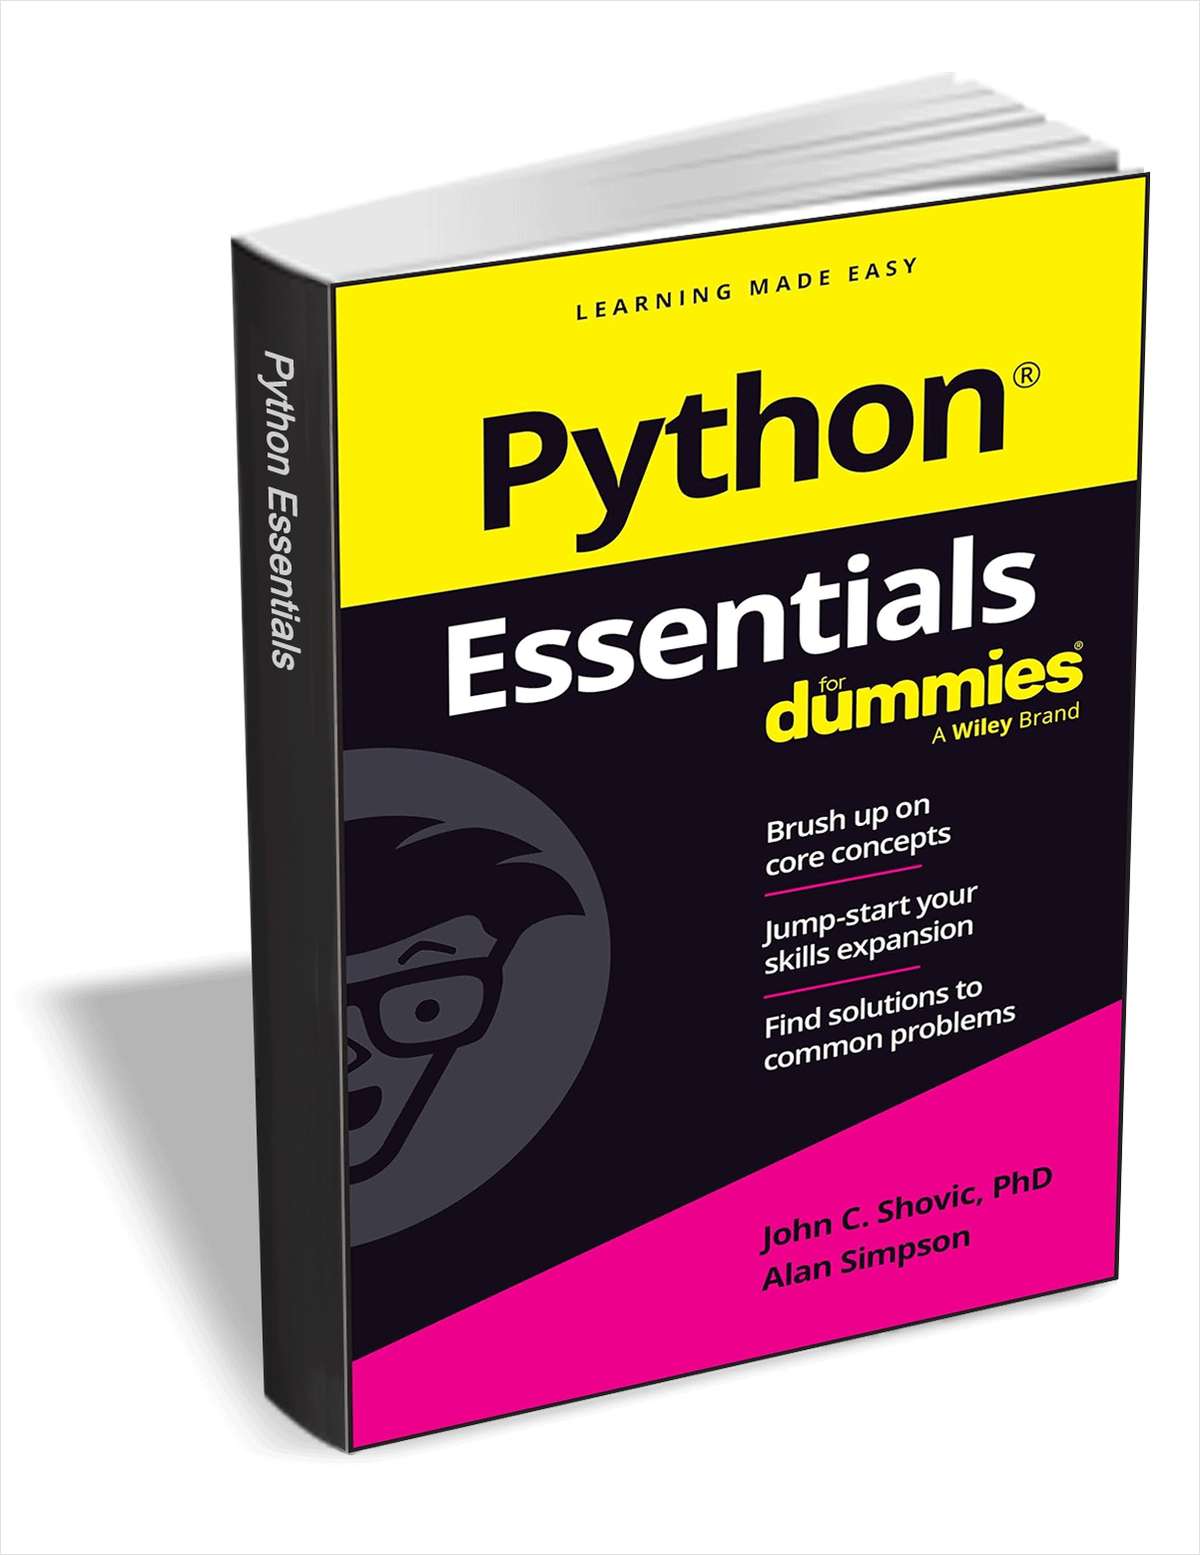 Python Essentials For Dummies ($10.00 Value) FREE for a Limited Time